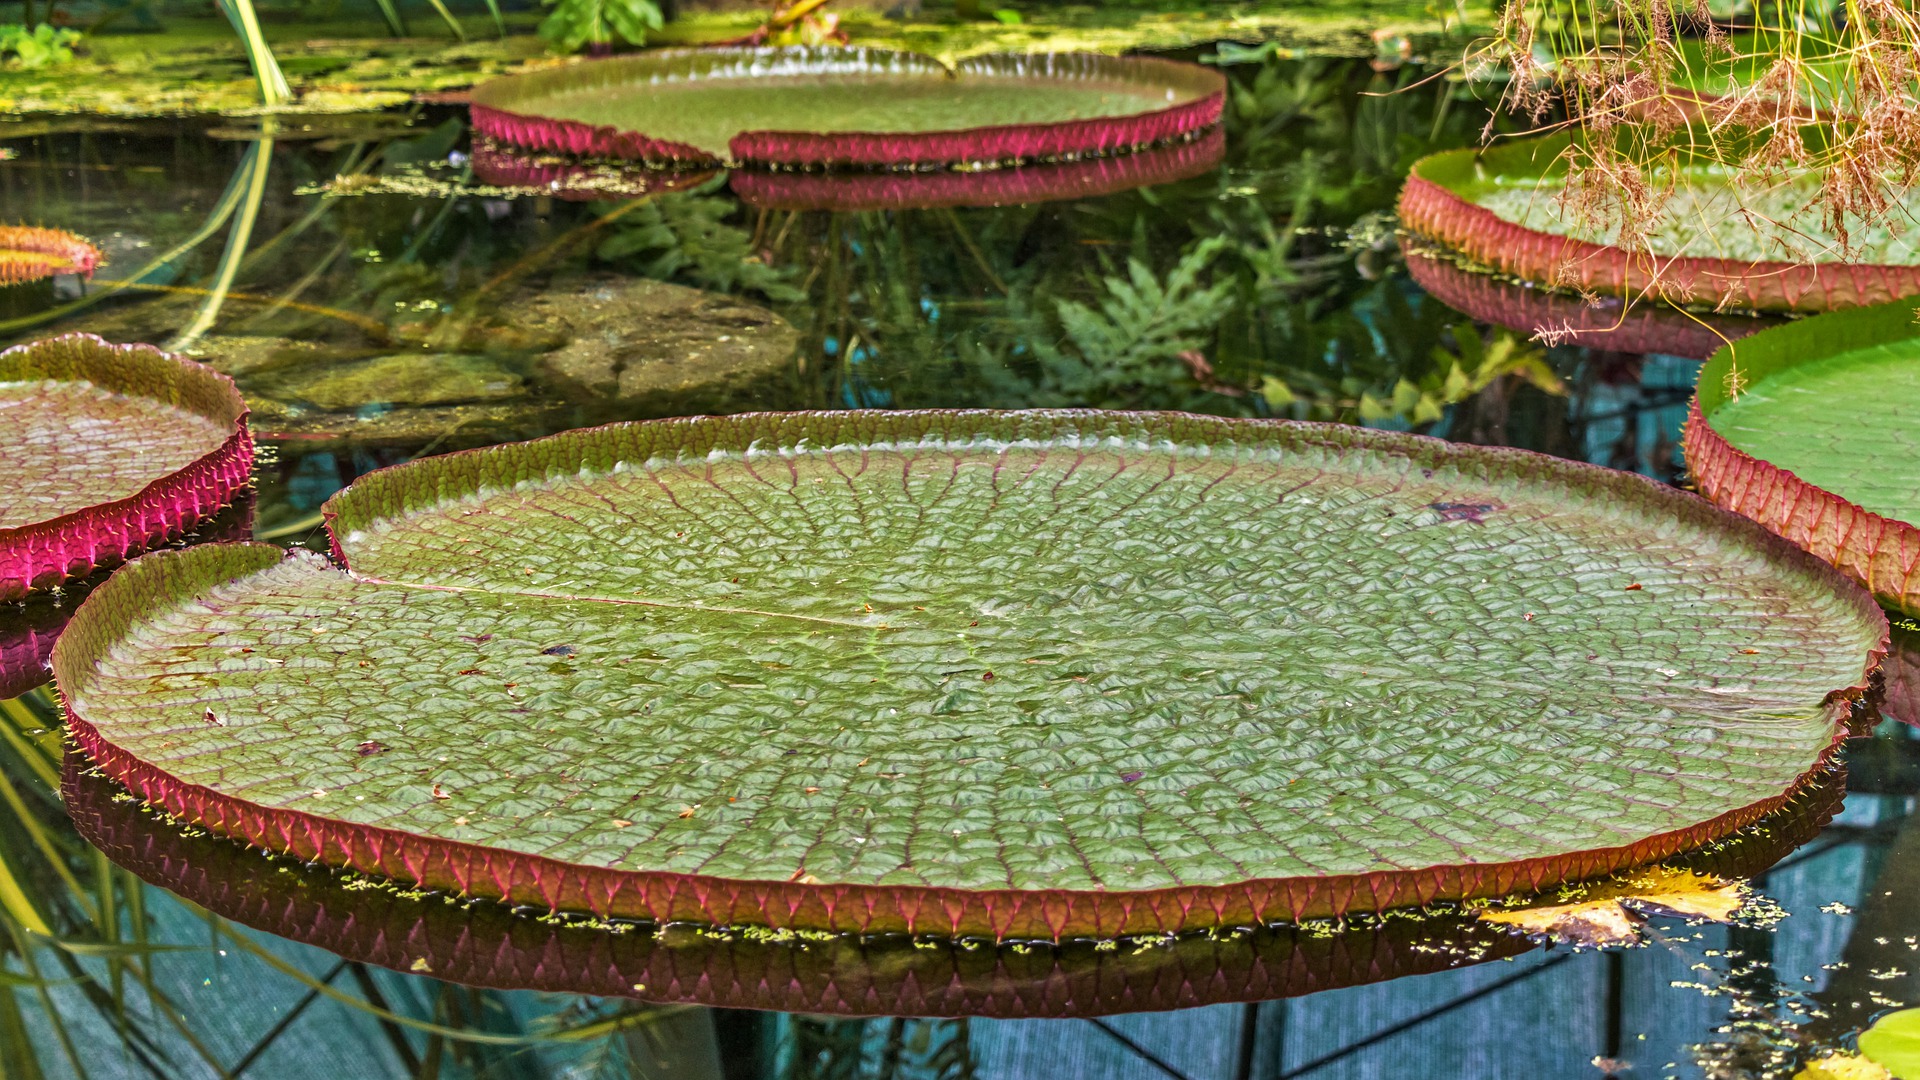 Scientists Discover The World’s Largest Waterlily That Was Hiding In Plain Sight For 177 years